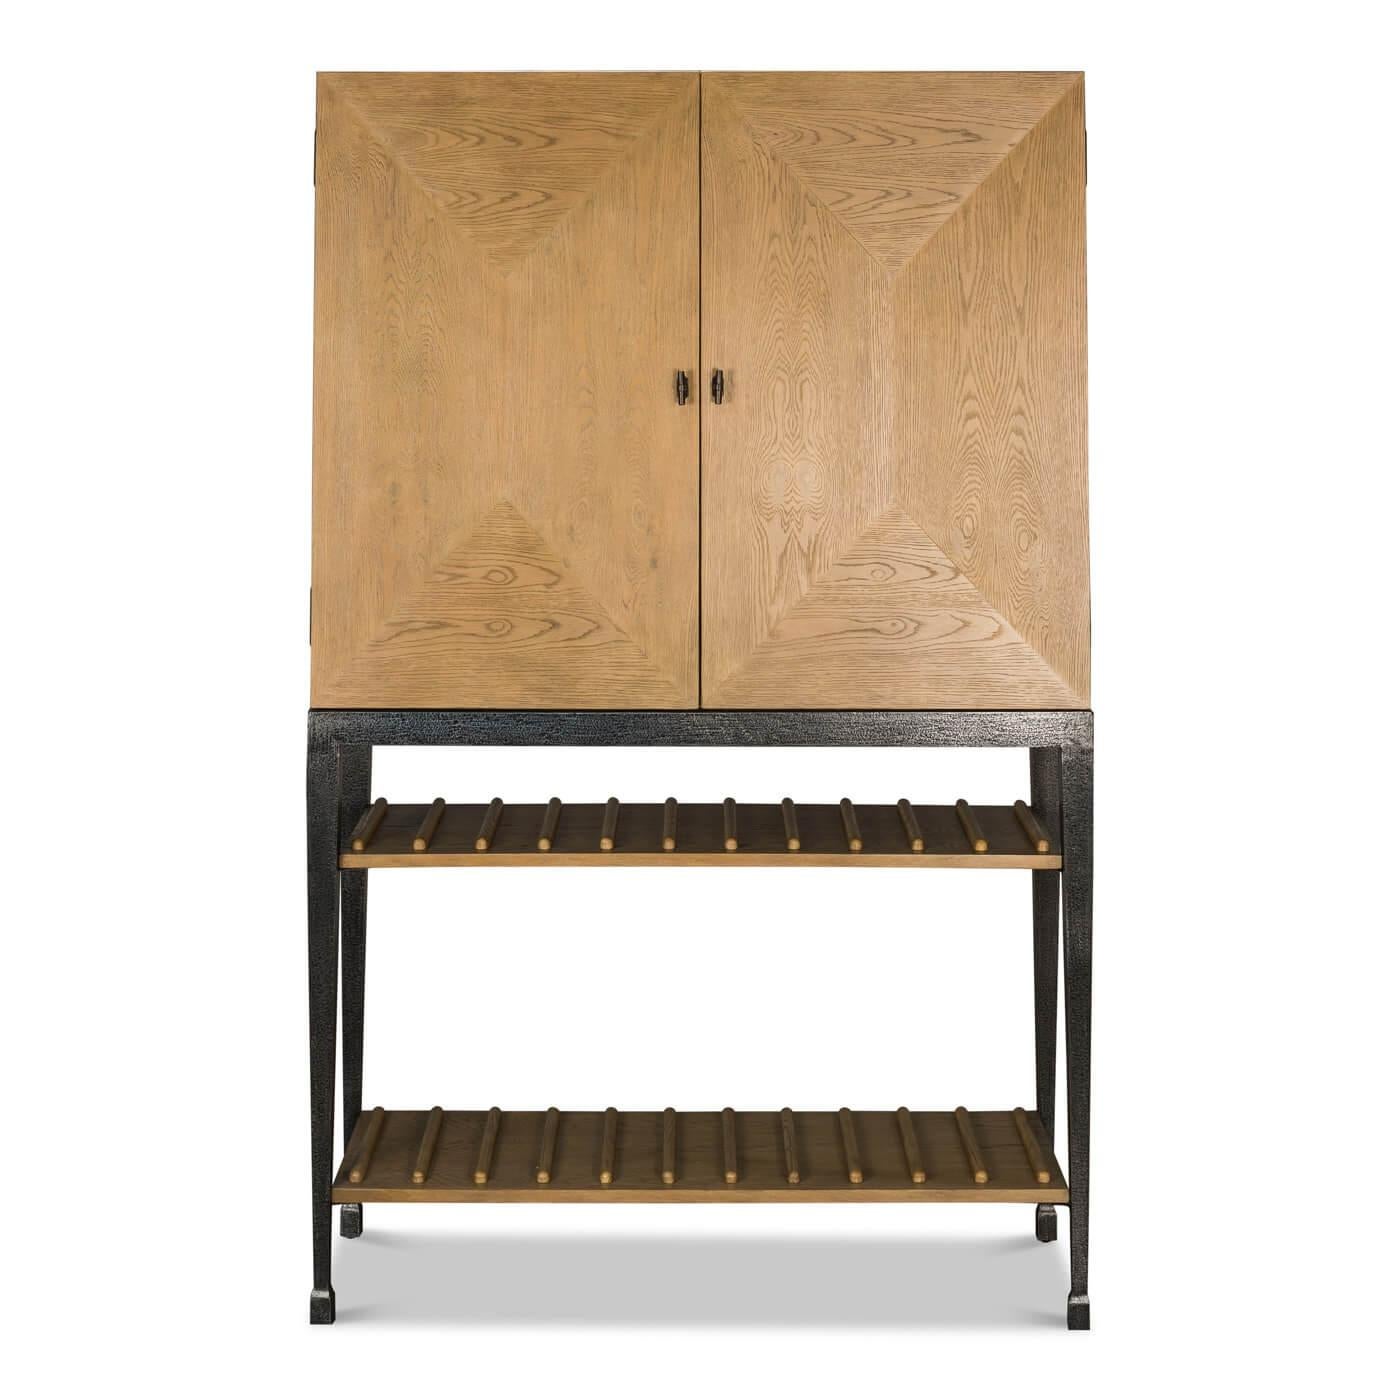 Modern Industrial bar cabinet, crafted of oak and is supported on an iron base. 

The top cabinet features finely crafted beveled doors in oak and oak veneer. When opened, the cabinet reveals storage for wine glasses, glass shelves for display and